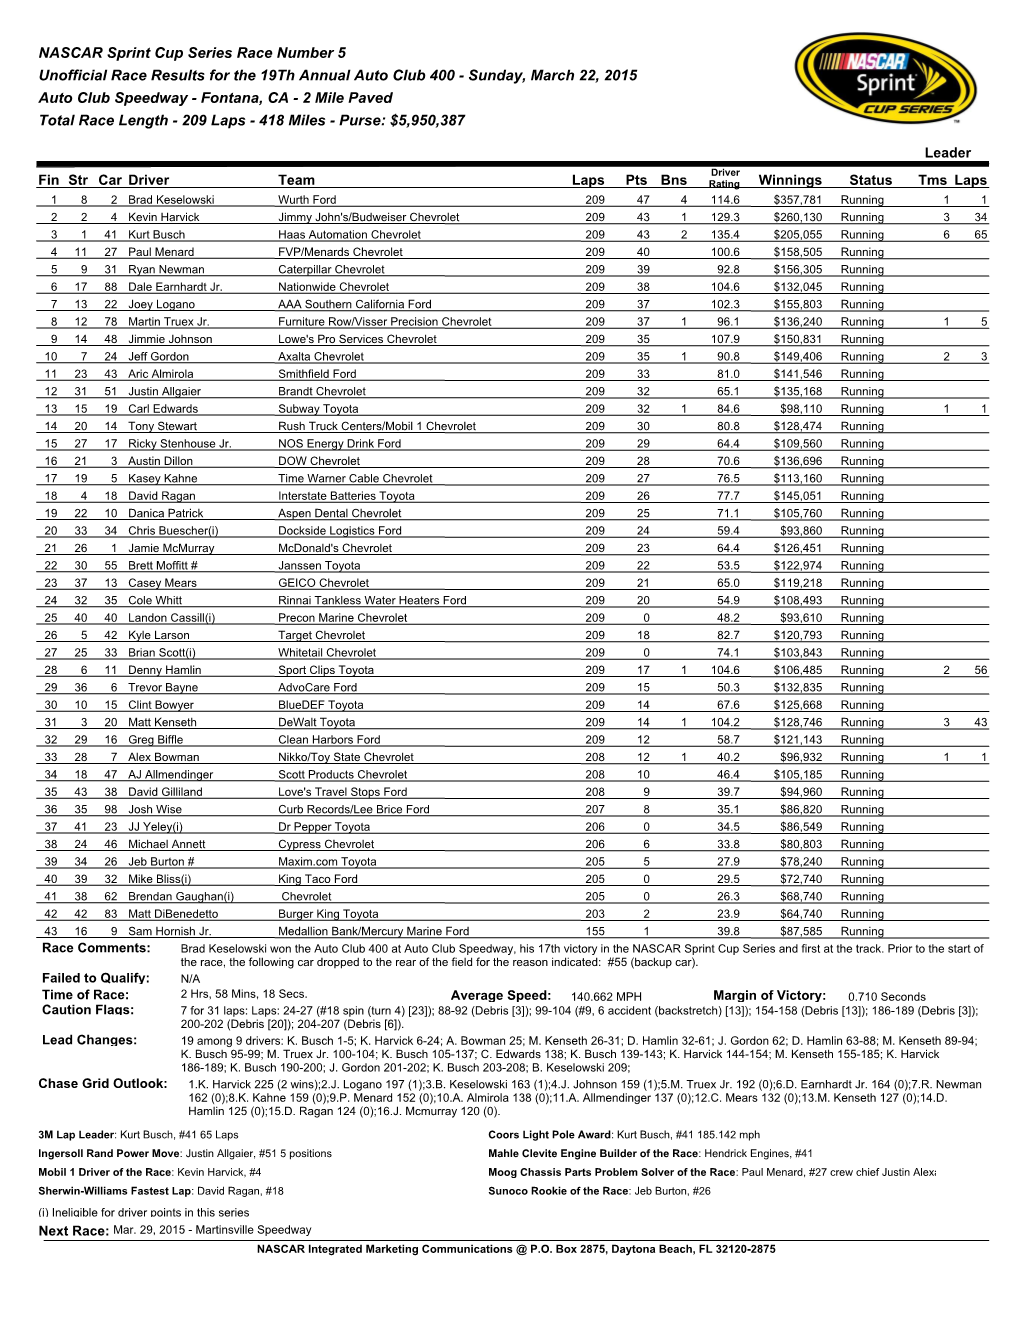 NASCAR Sprint Cup Series Race Number 5 Unofficial Race Results